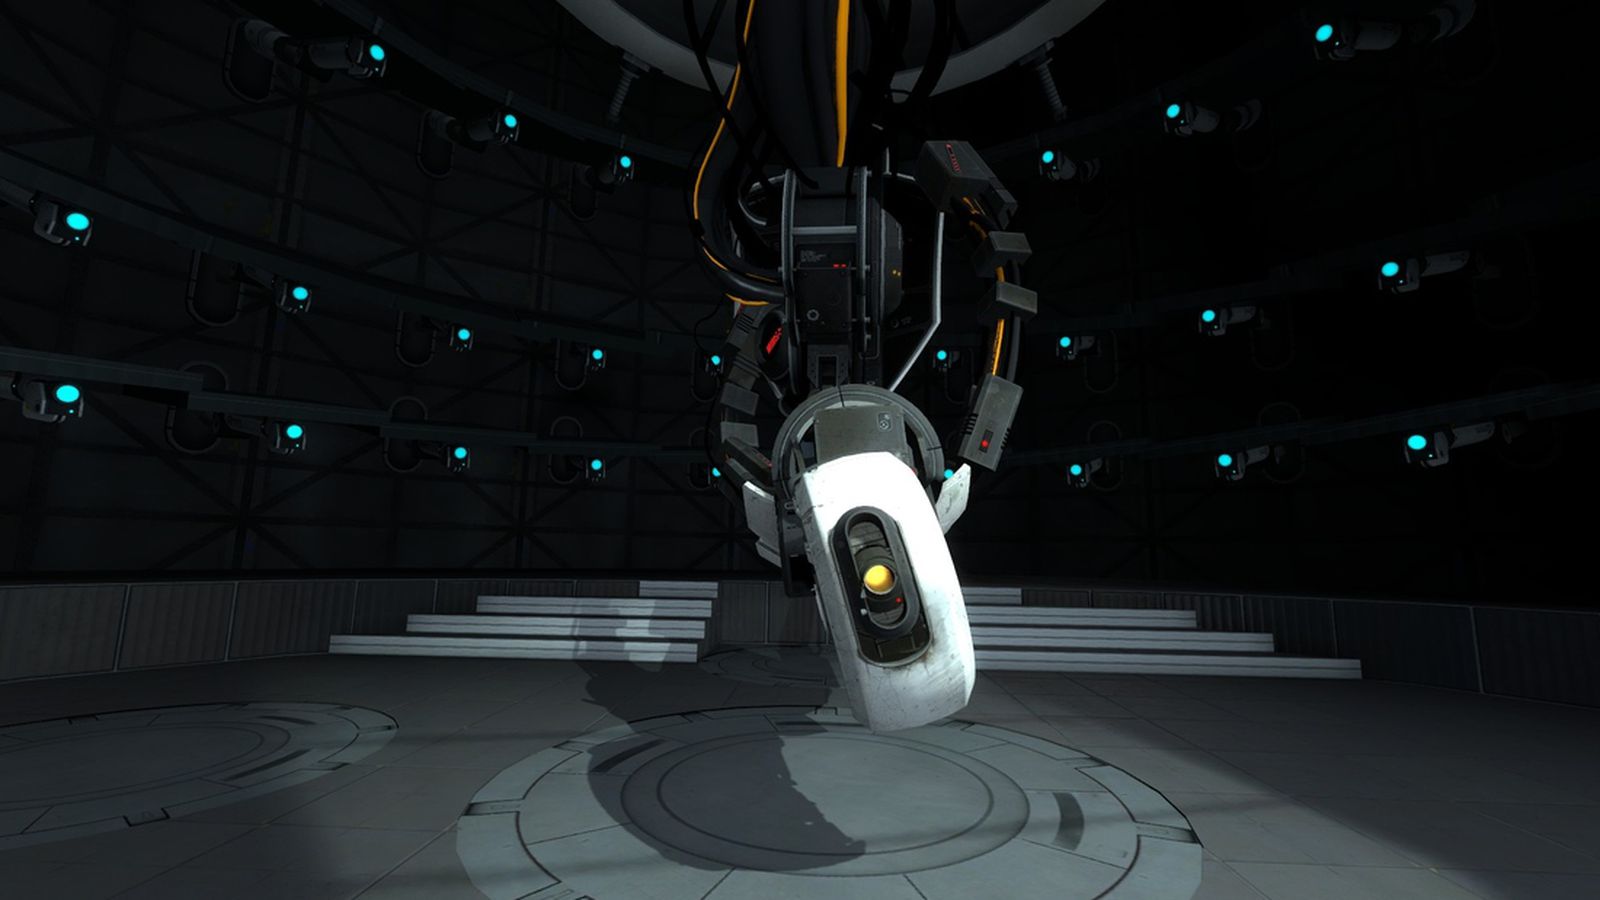 <strong><u>Betrayed By GLaDOS</u></strong>
</br>
</br>
<em>Portal</em> starts off simply enough, giving you plenty of time to play with the physics-defying powers of the Portal gun.
</br>
</br>
But you eventually discover that these tests administered by the robotic GLaDOS are designed to kill you, turning the second part of the game into a fight for your life.
